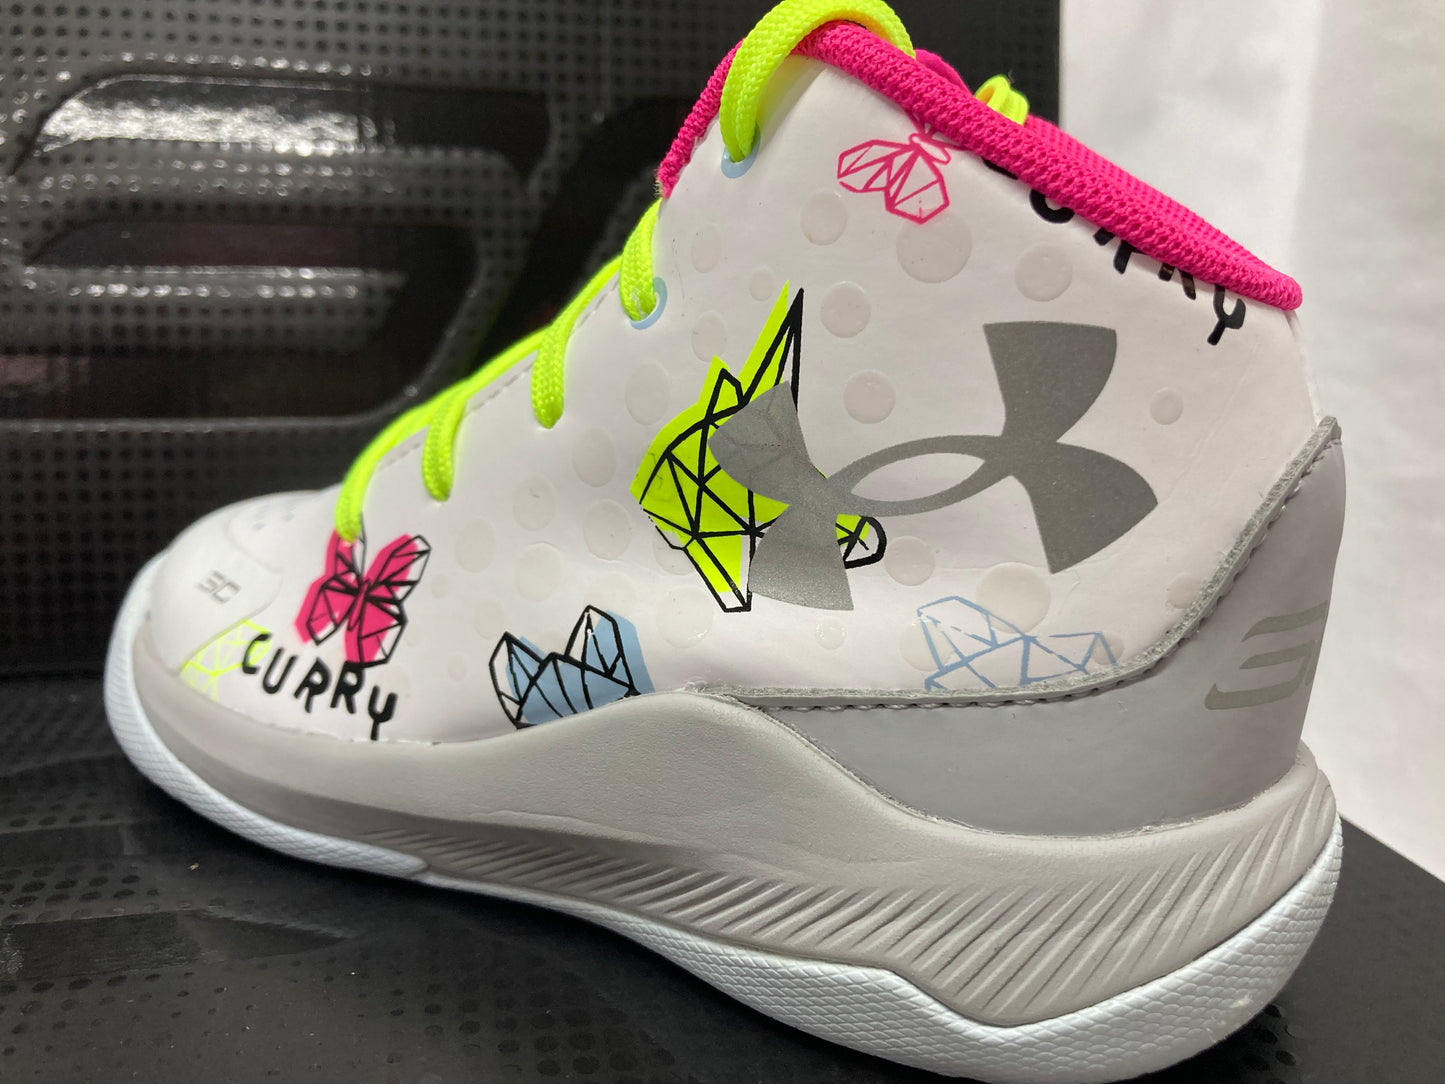 Under Armour Curry 1 TD 'Tattoo'